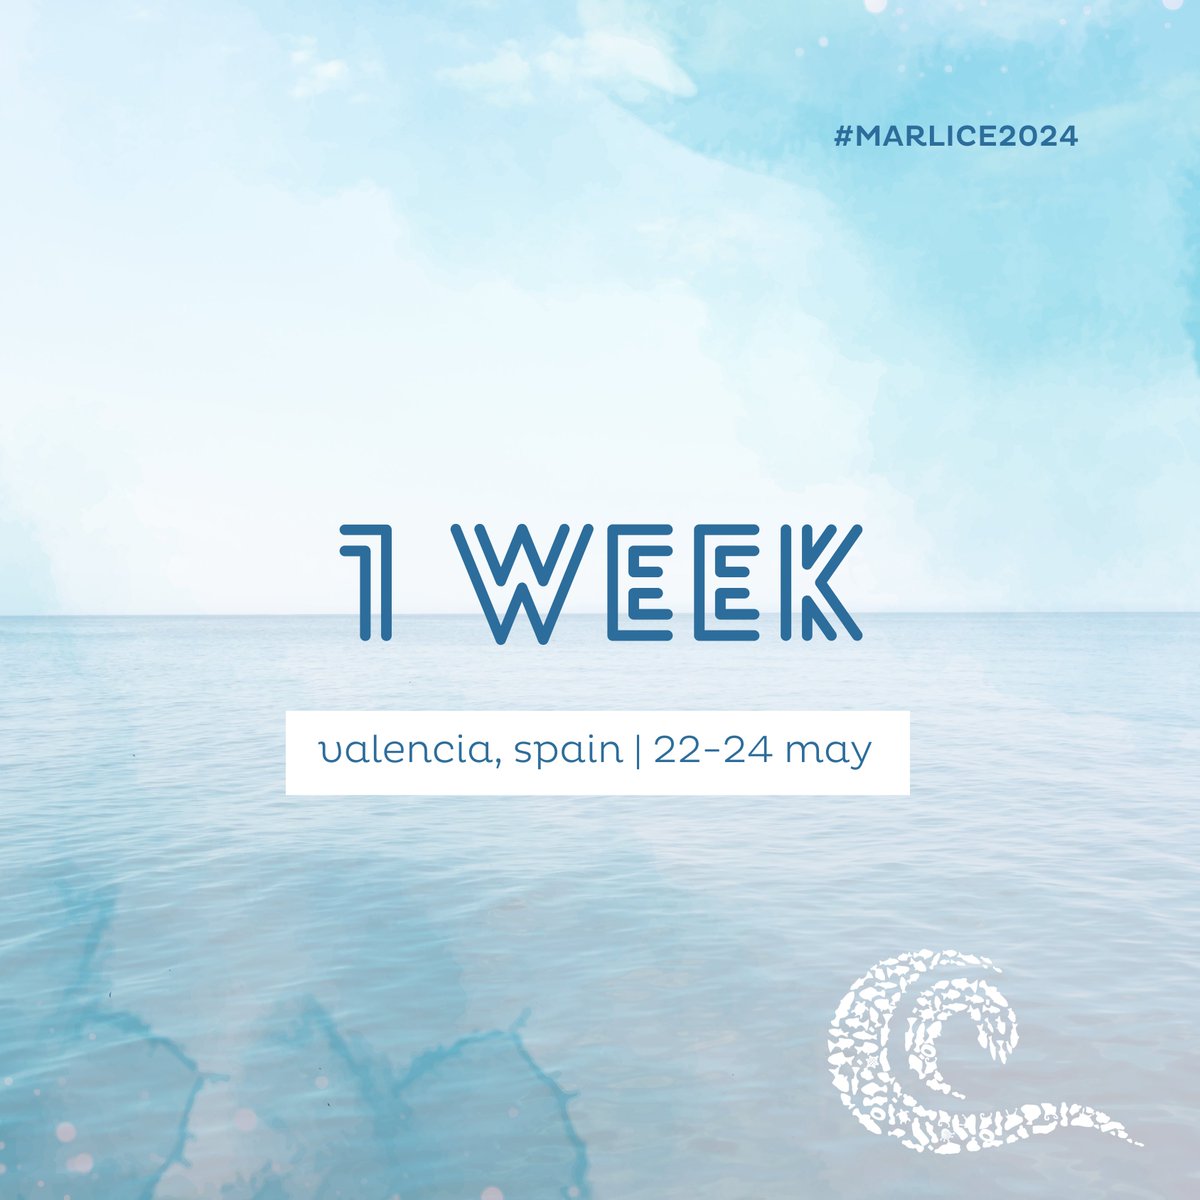 MARLICE 2024 1 week to go before MARLICE 2024! Valencia (Spain) | 22-24 May 2024 Between the historical building El Reloj and the futuristic Veles e Vent, from 22 to 24 may 2024, we will hold the most important event in Spain to find solutions to marine litter.